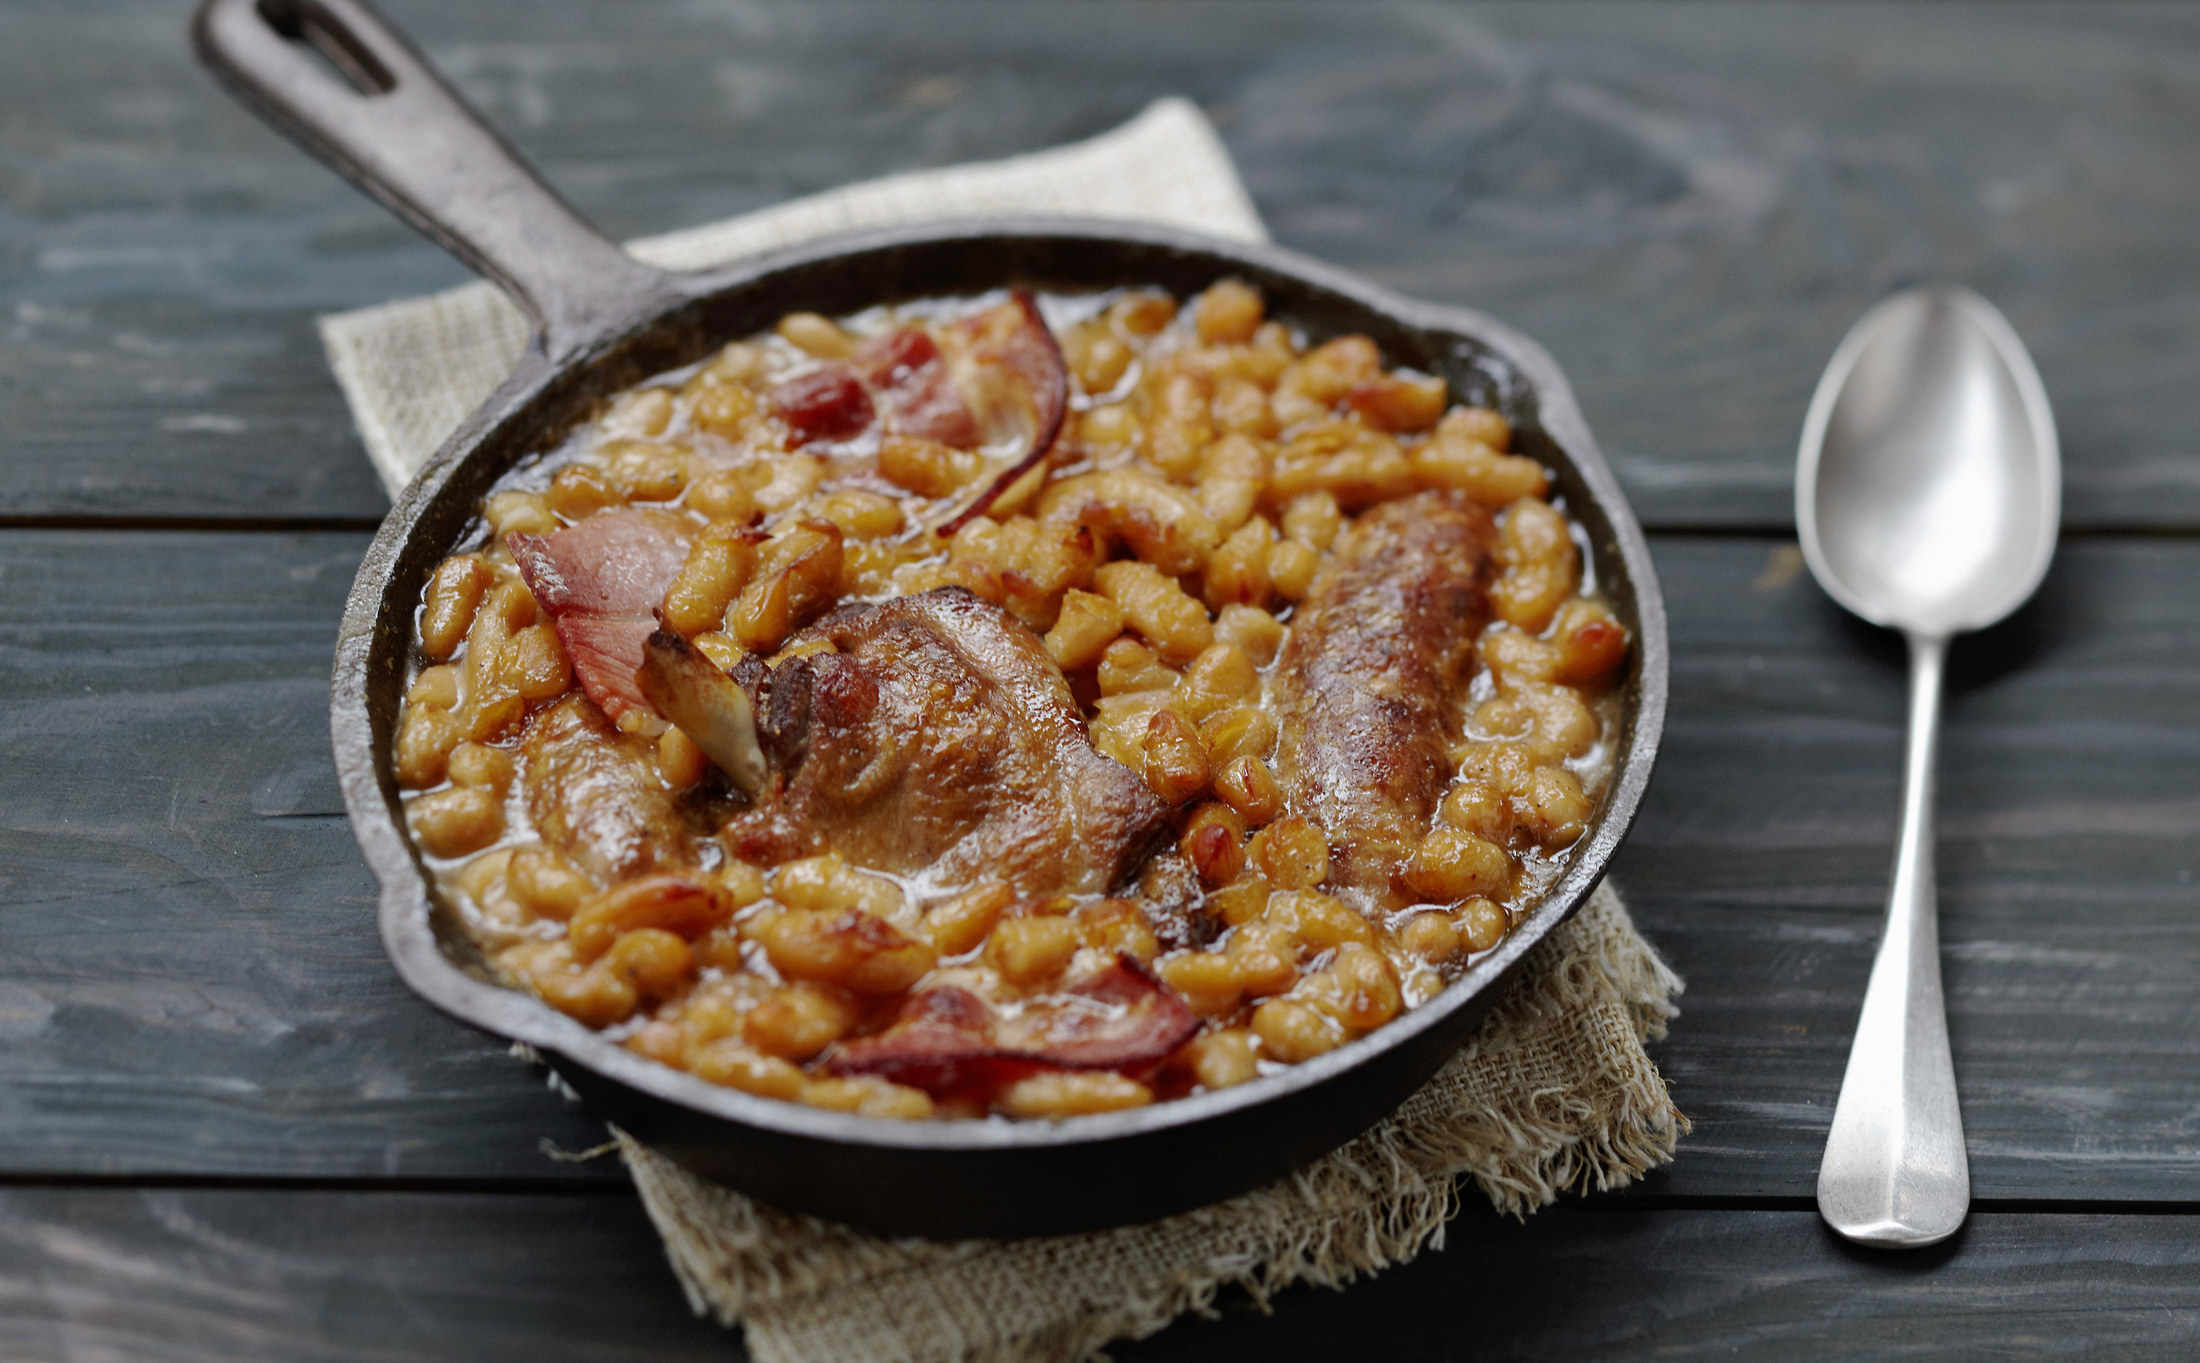 Homemade cassoulet in a small cast iron skillet.